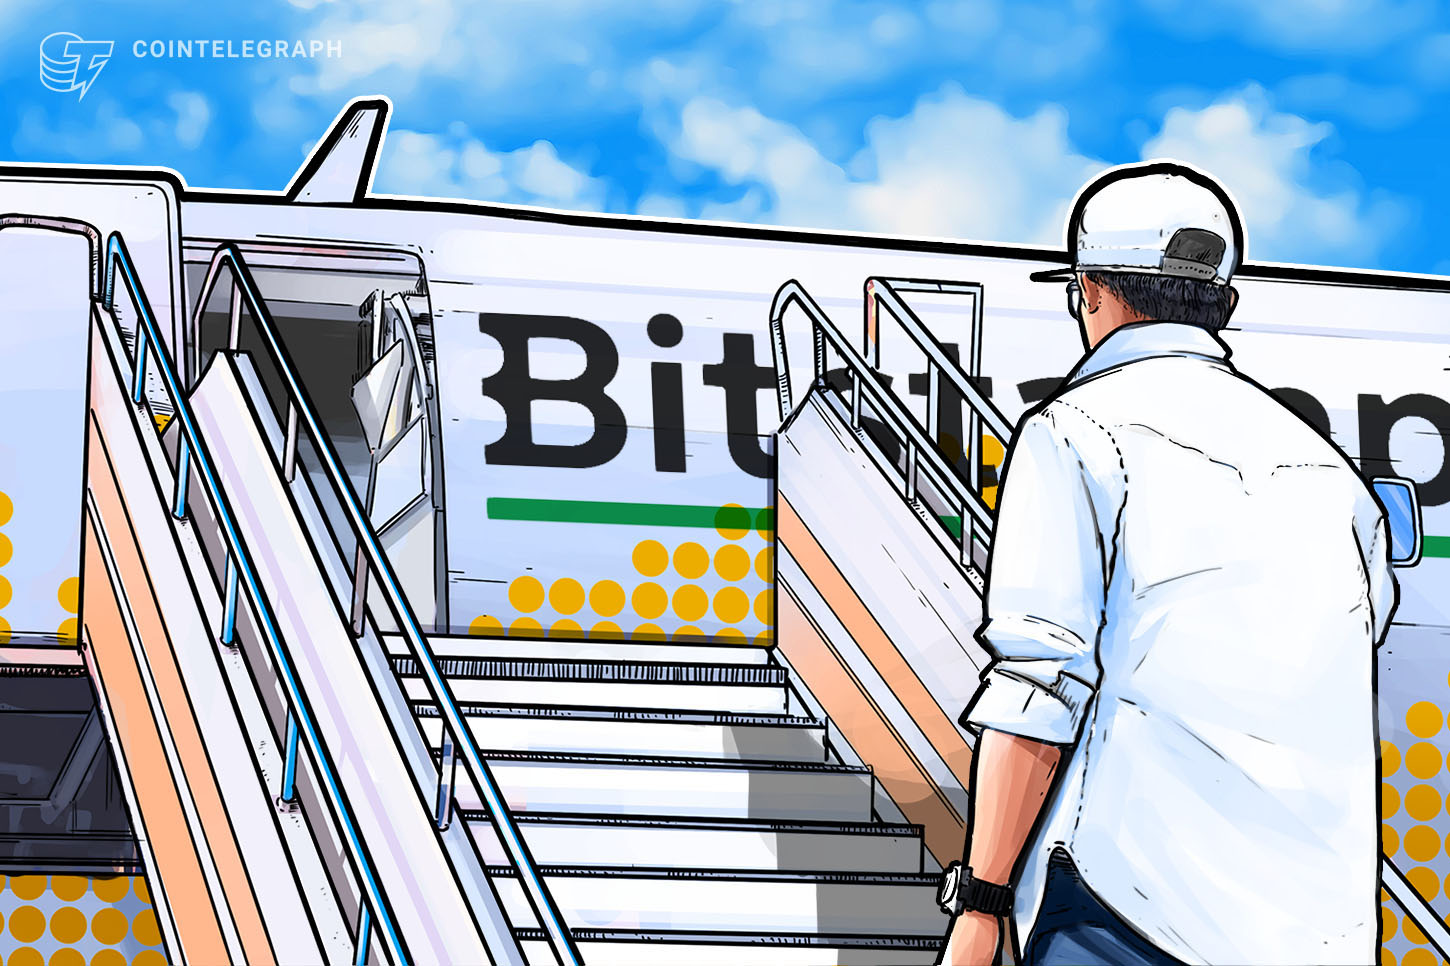 Bitstamp reportedly leaves London after eight years of operation